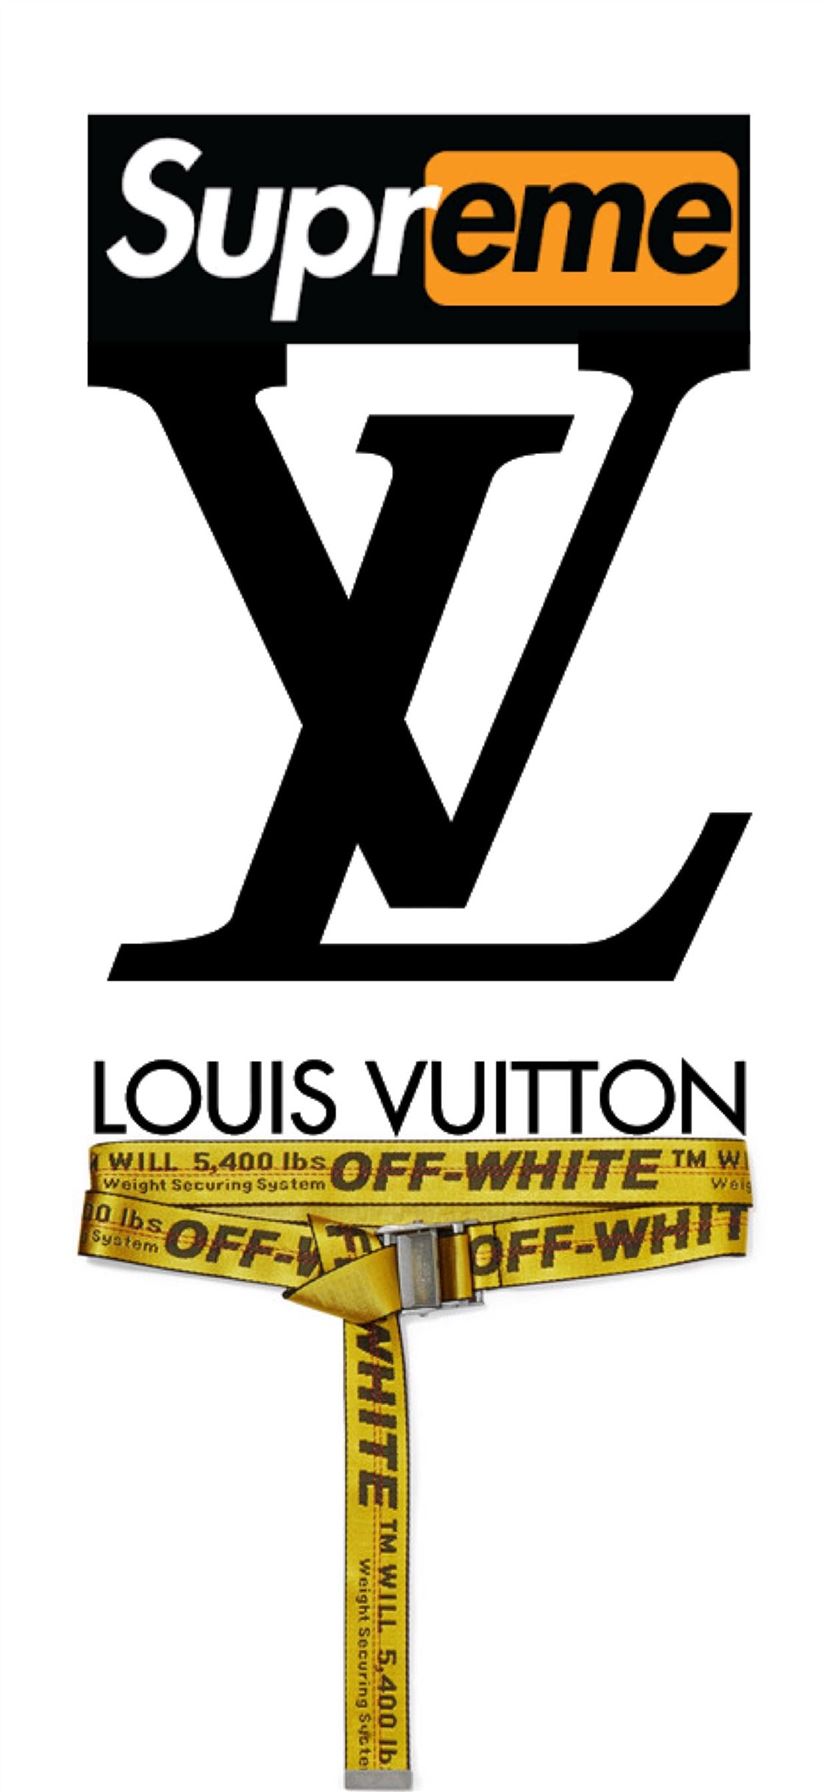 Louis Vuitton off white wallpaper iPhone X Wallpapers Download